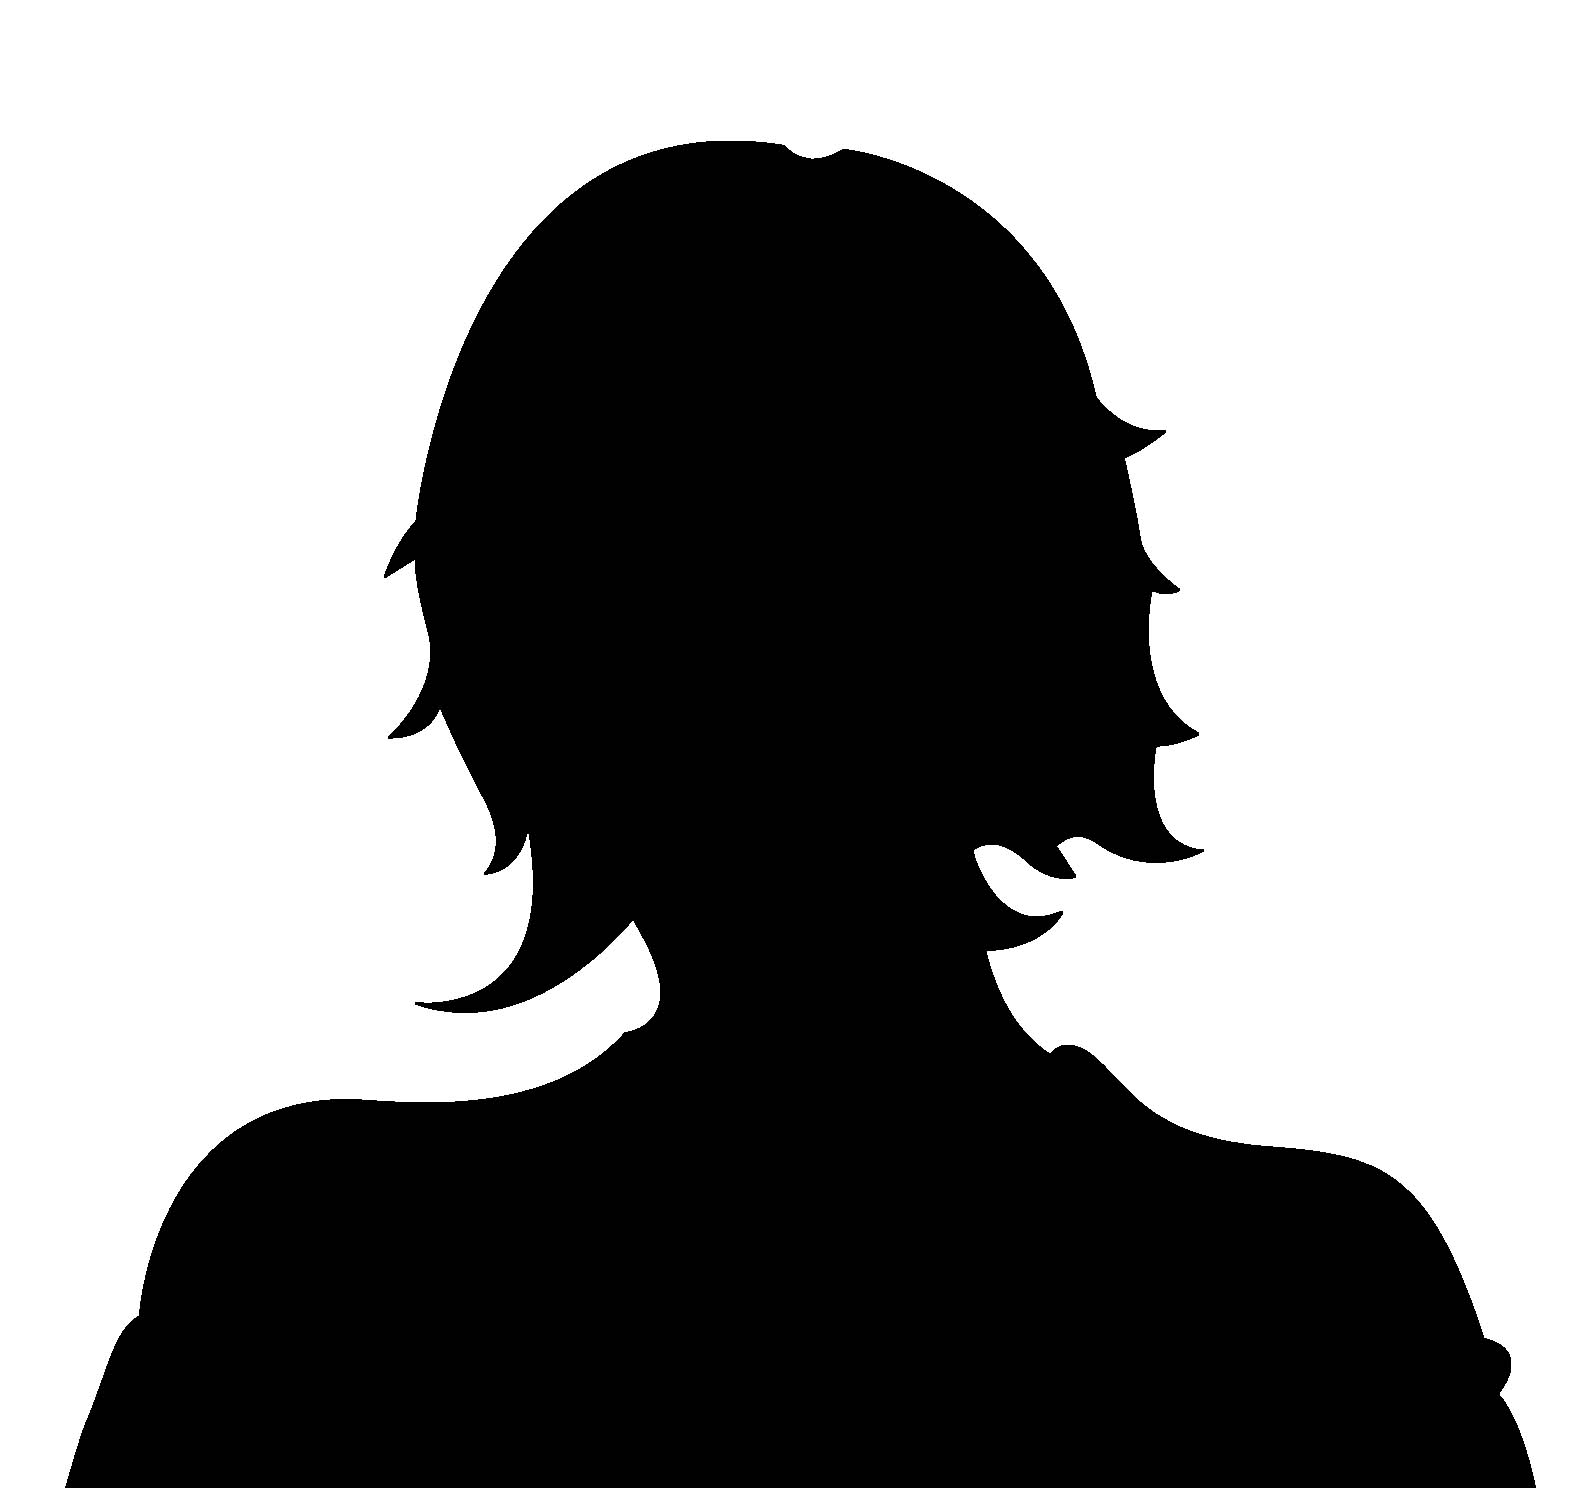 Top Headshot Silhouette Image for Pinterest Tattoos